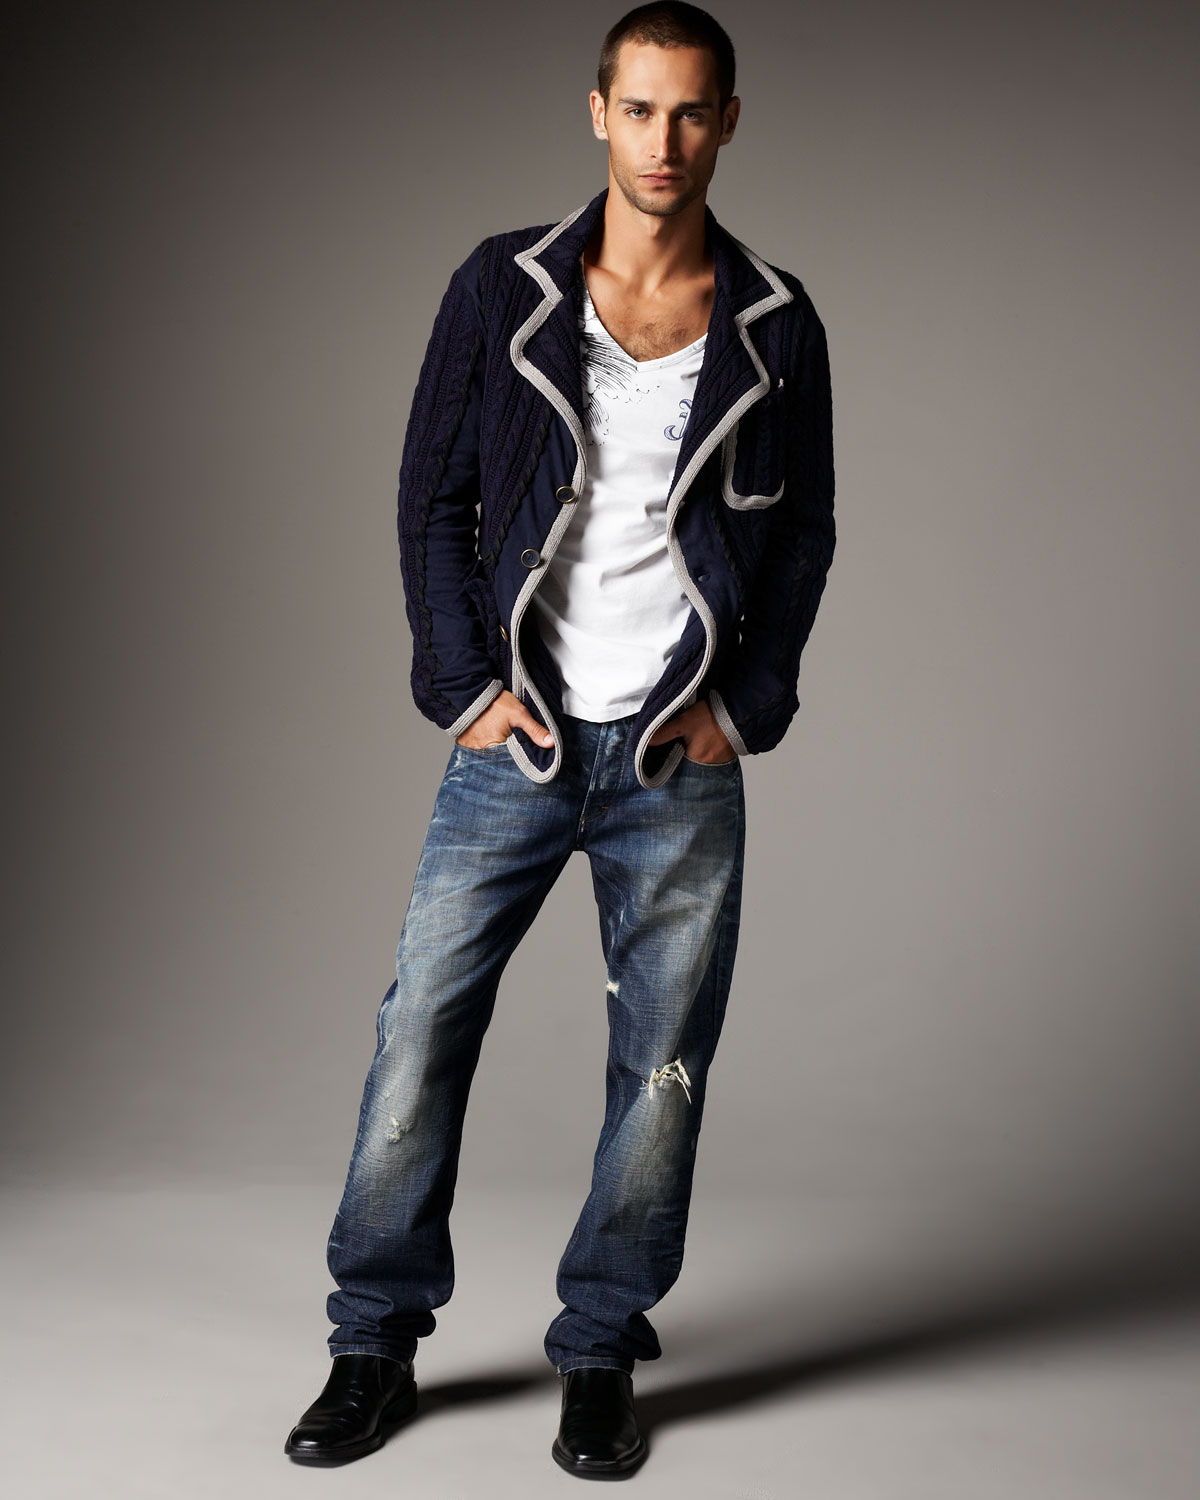 Rock Style Clothing For Men